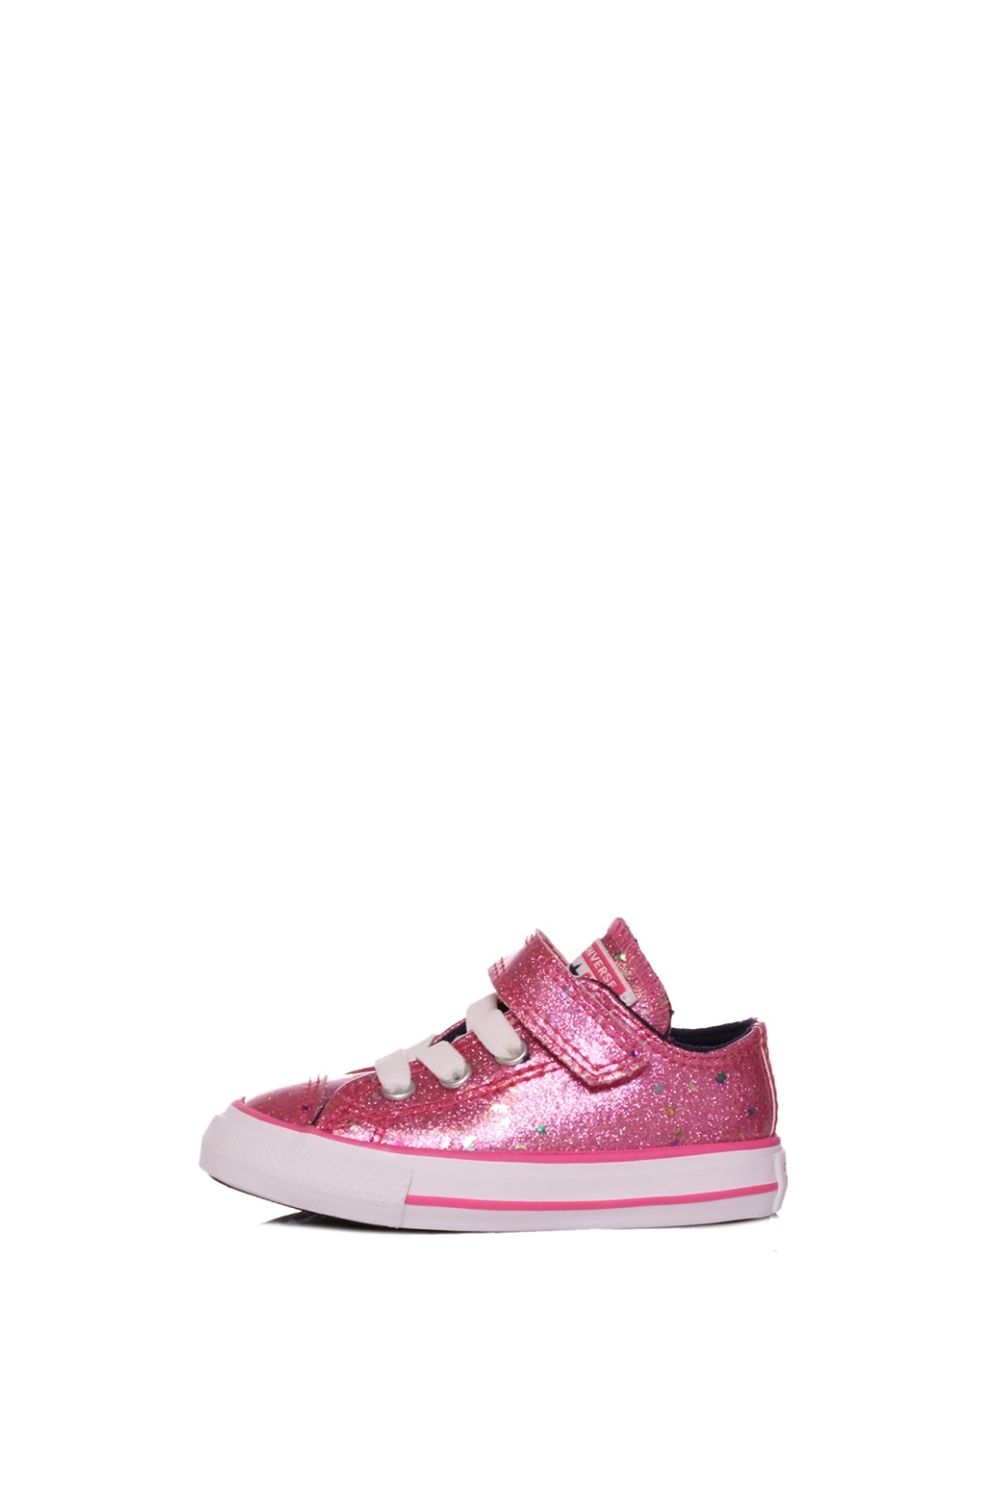 CONVERSE - Βρεφικά sneakers CONVERSE CHUCK TAYLOR ALL STAR 1V ροζ Παιδικά/Baby/Παπούτσια/Sneakers